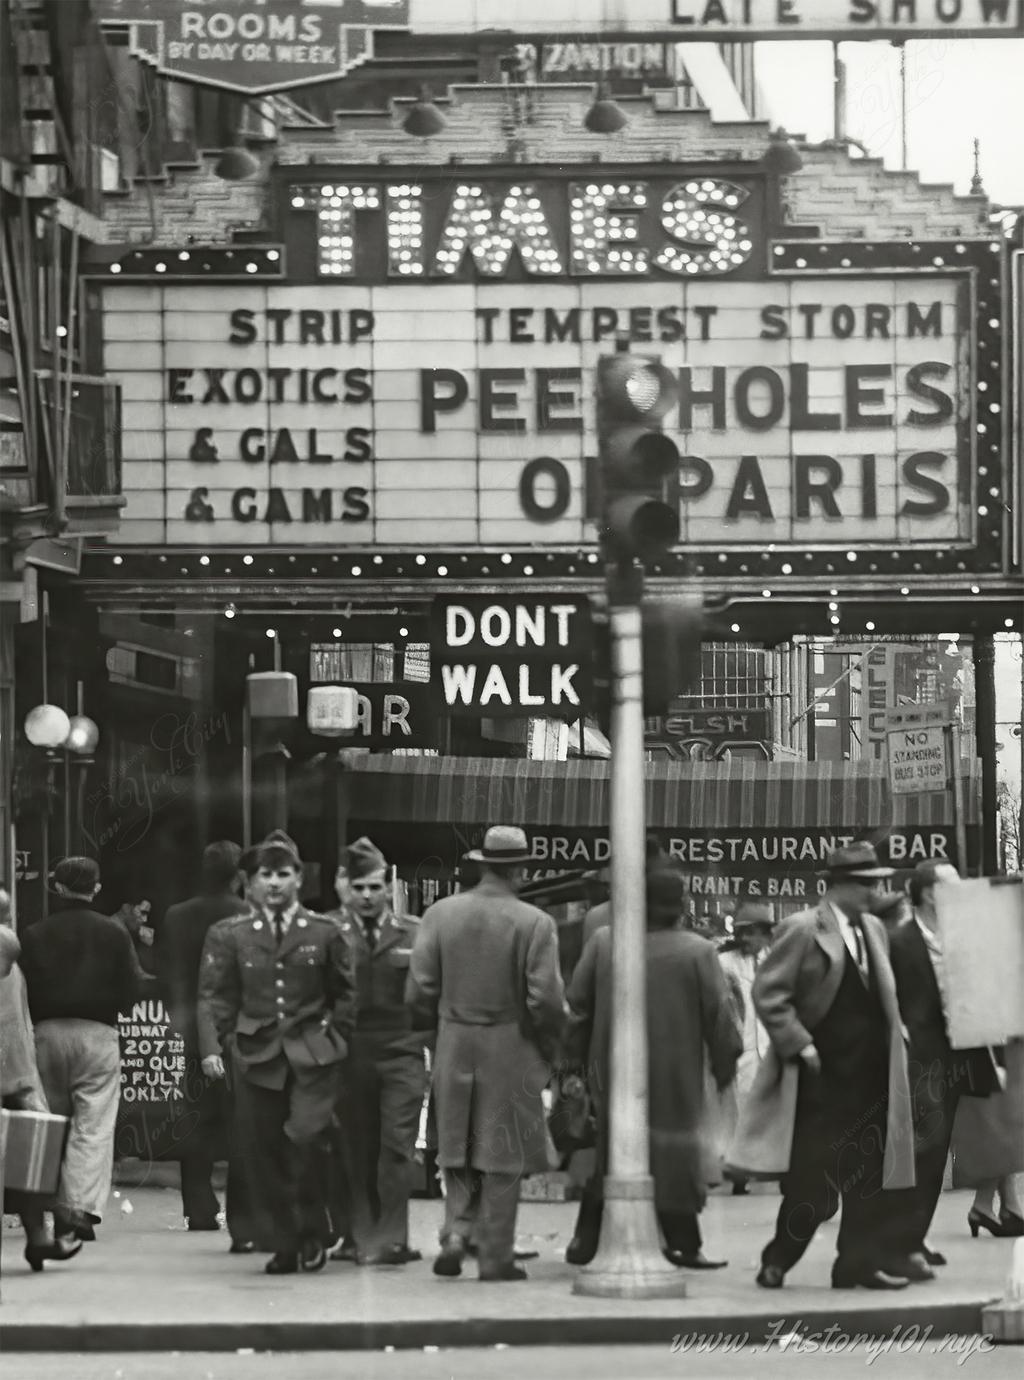 Photograph of Marquee in Times Square - The neighborhood would become renowned for go-go bars and peep show establishments.